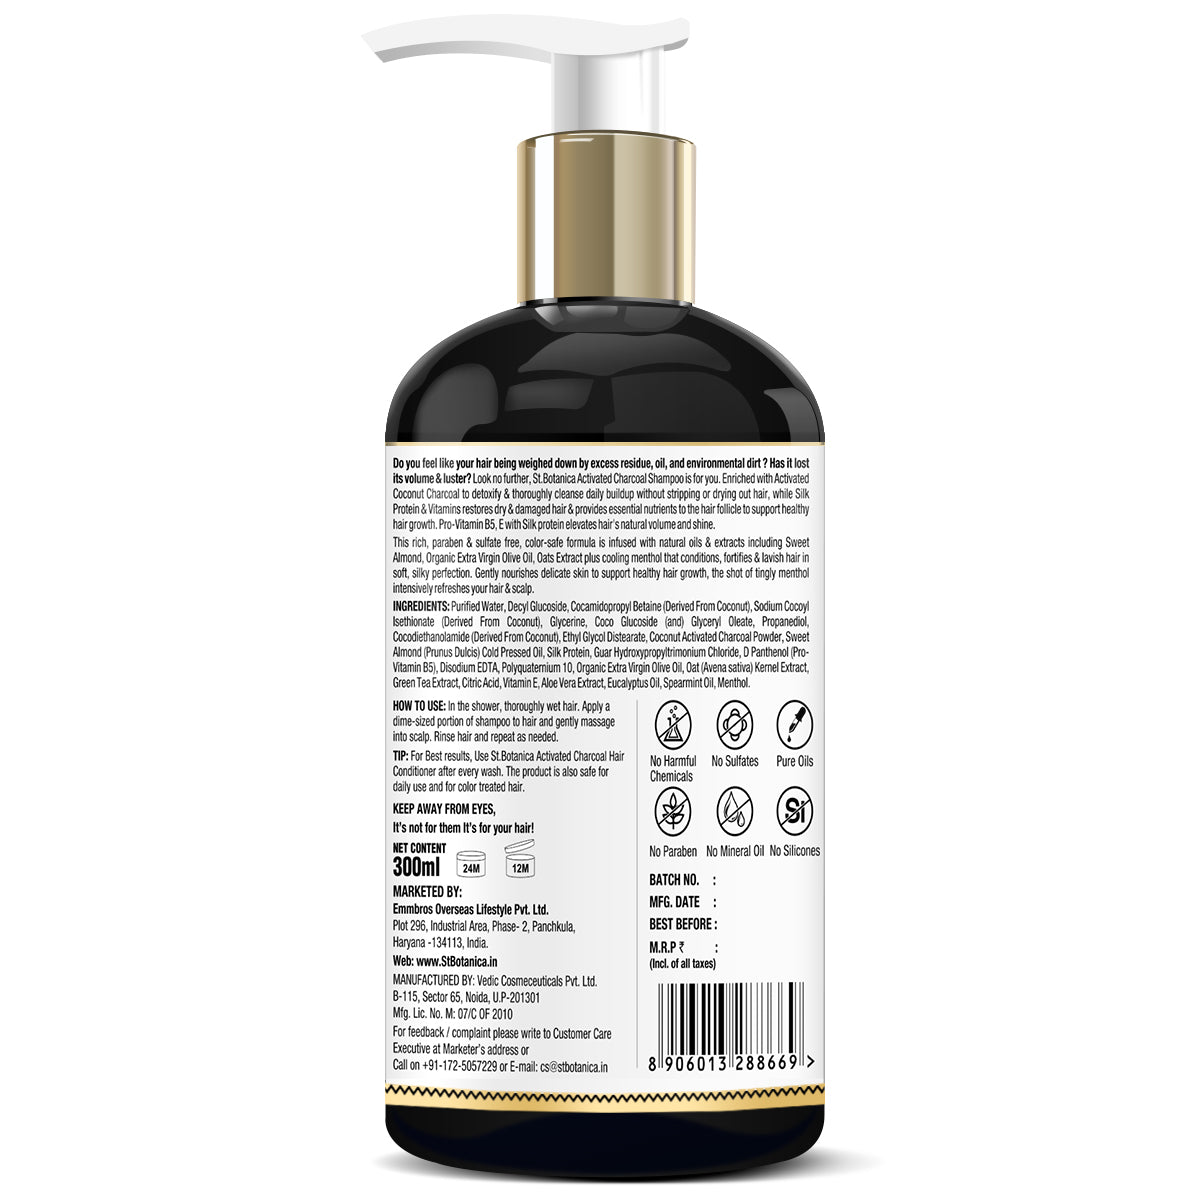 St.Botanica Activated Charcoal Hair Shampoo, No SLS/Sulphate, Paraben or Silicon - Refreshing Menthol, Organic Olive & Almond Oil, Vitamin B5, E, Oats & Silk Protein, 300 ml